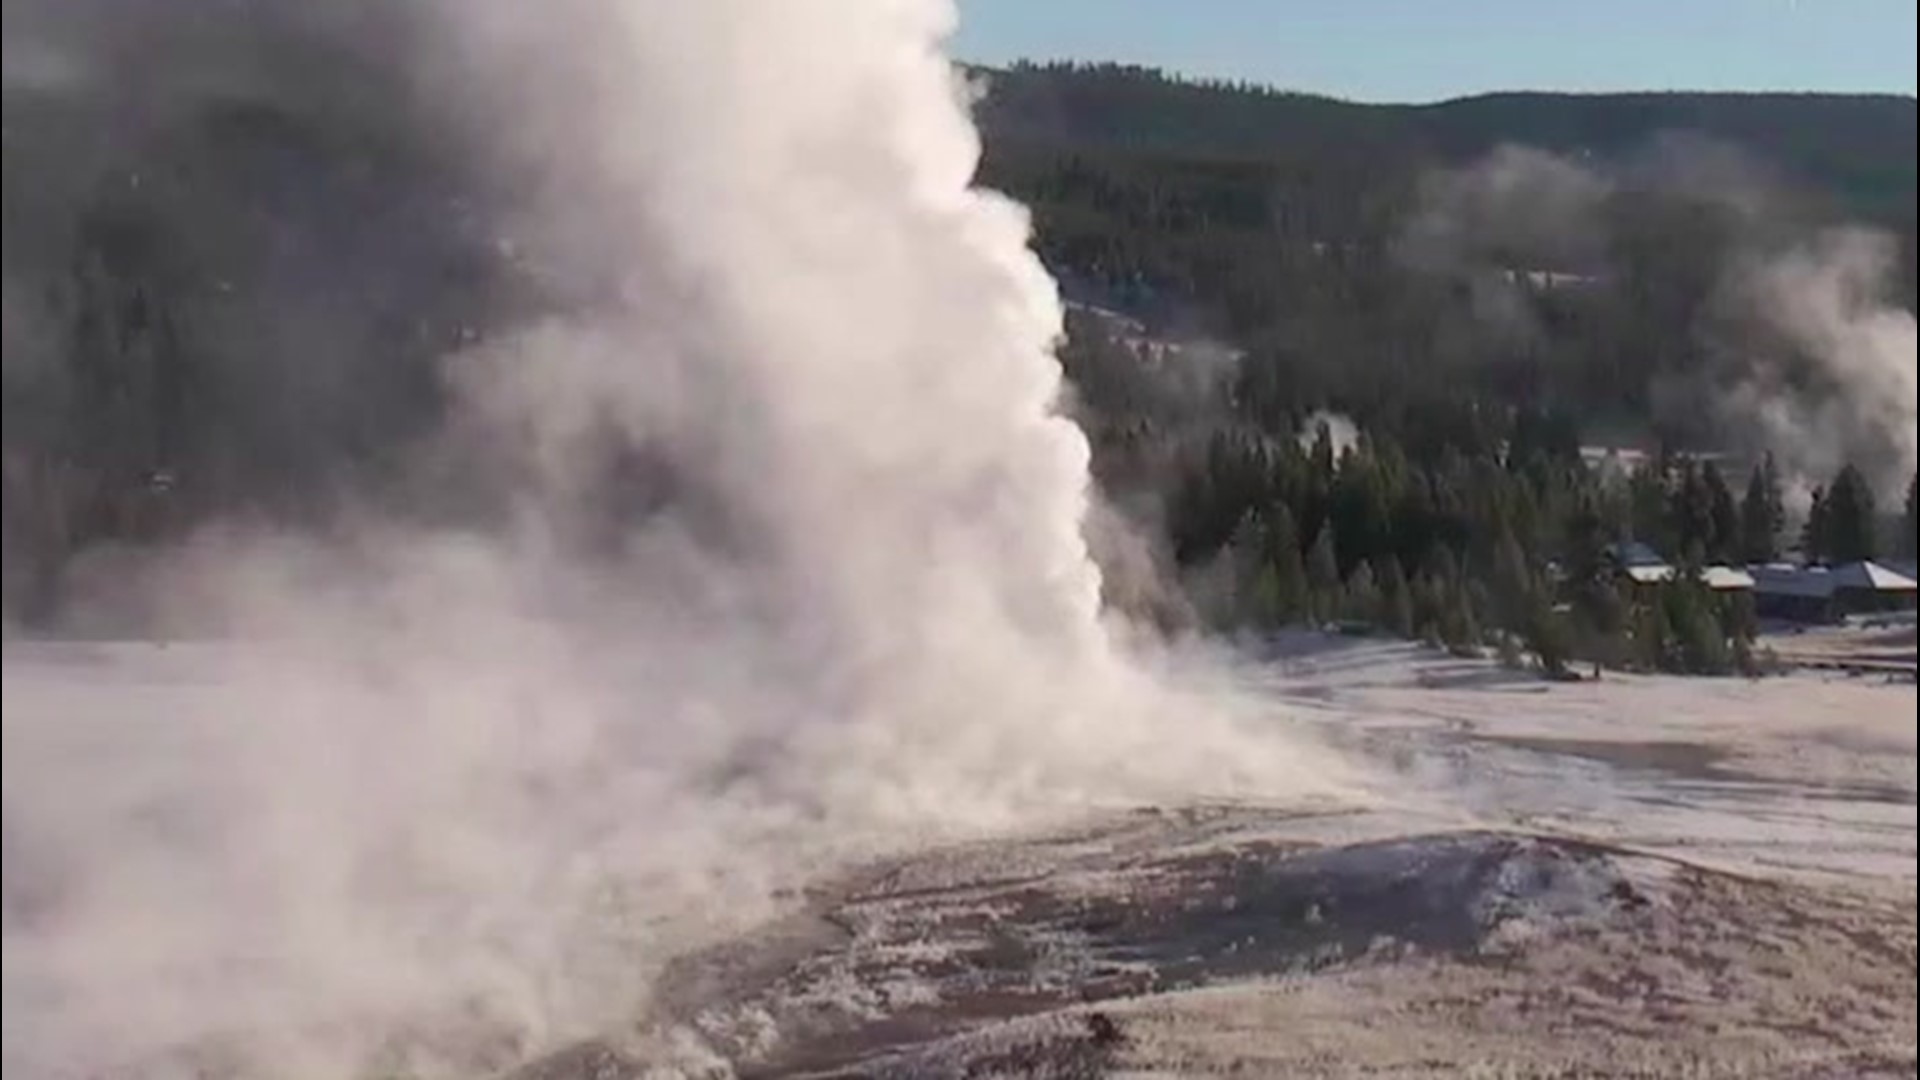 Temperatures in Yellowstone National Park, Wyoming, were below zero degrees Fahrenheit on Oct. 23. Steam from Old Faithful rose, even when it wasn't erupting.